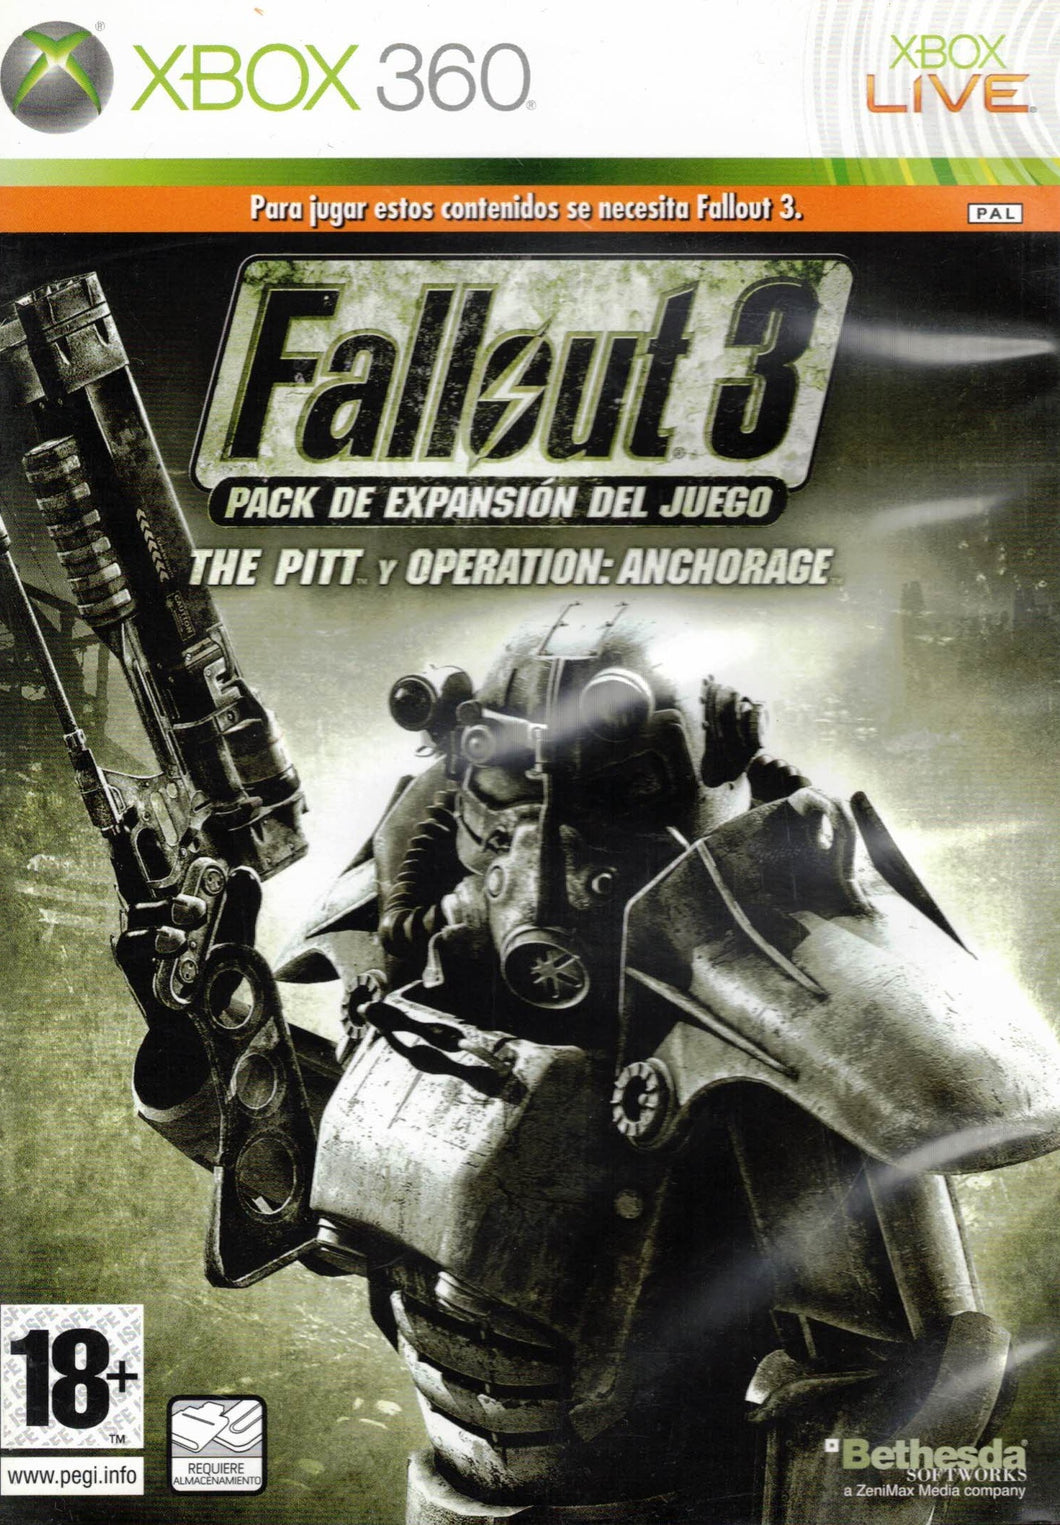 Fallout 3, game expansion pack: The Pitt and Operation Anchorage (XBOX 360) (very good second-hand)